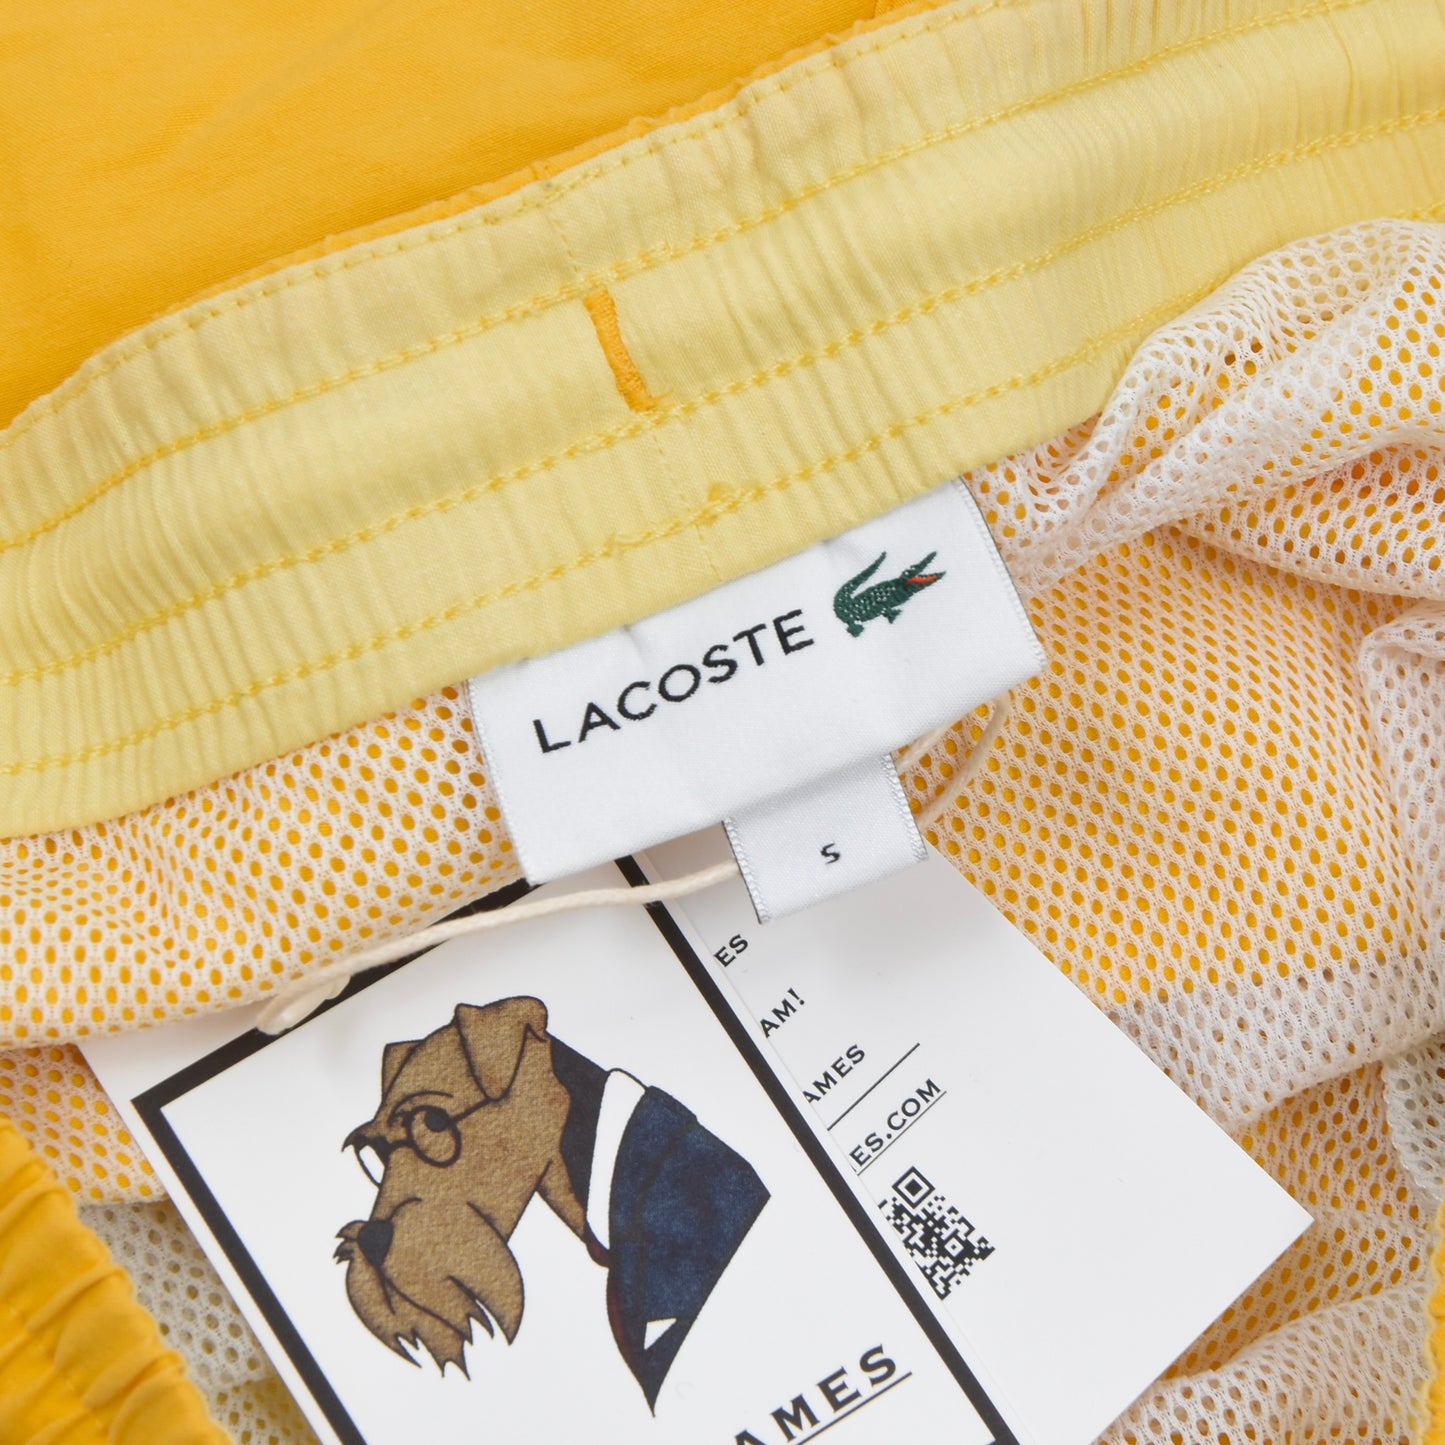 2x Lacoste Swim Trunks Size S - Yellow & Red